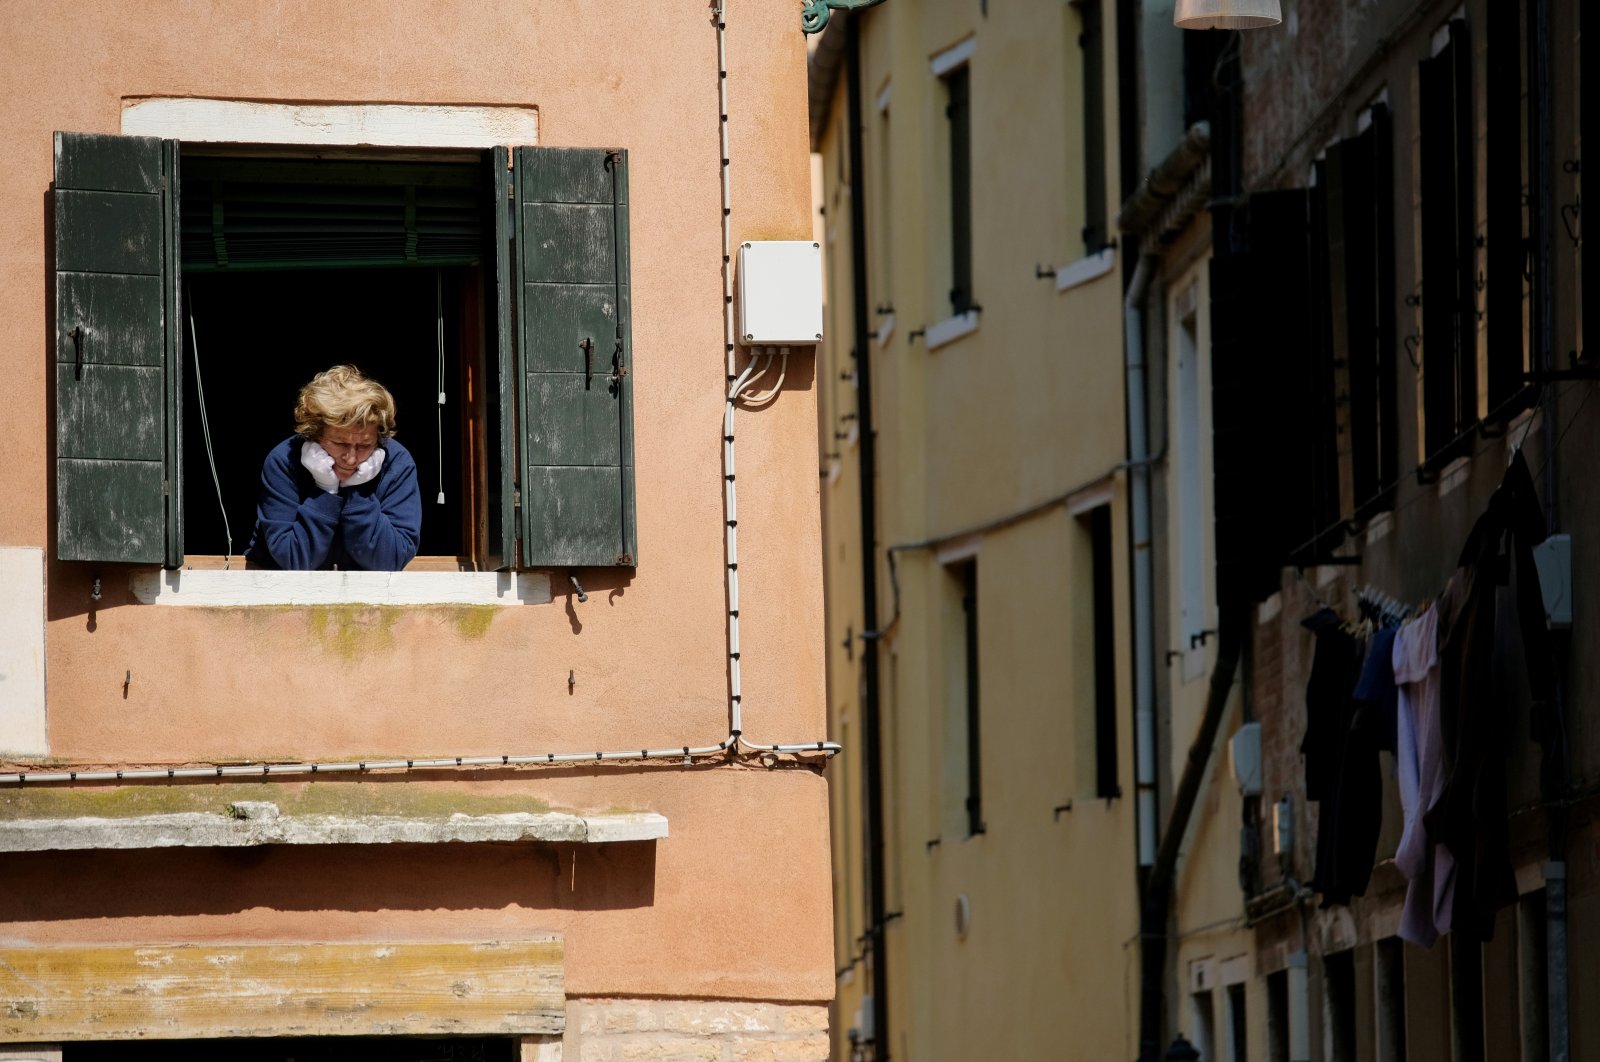 A woman looks out of an apartment window as Italians remain under lockdown to prevent the spread of the coronavirus pandemic, Venice, Italy, April 4, 2020. (Reuters Photo)